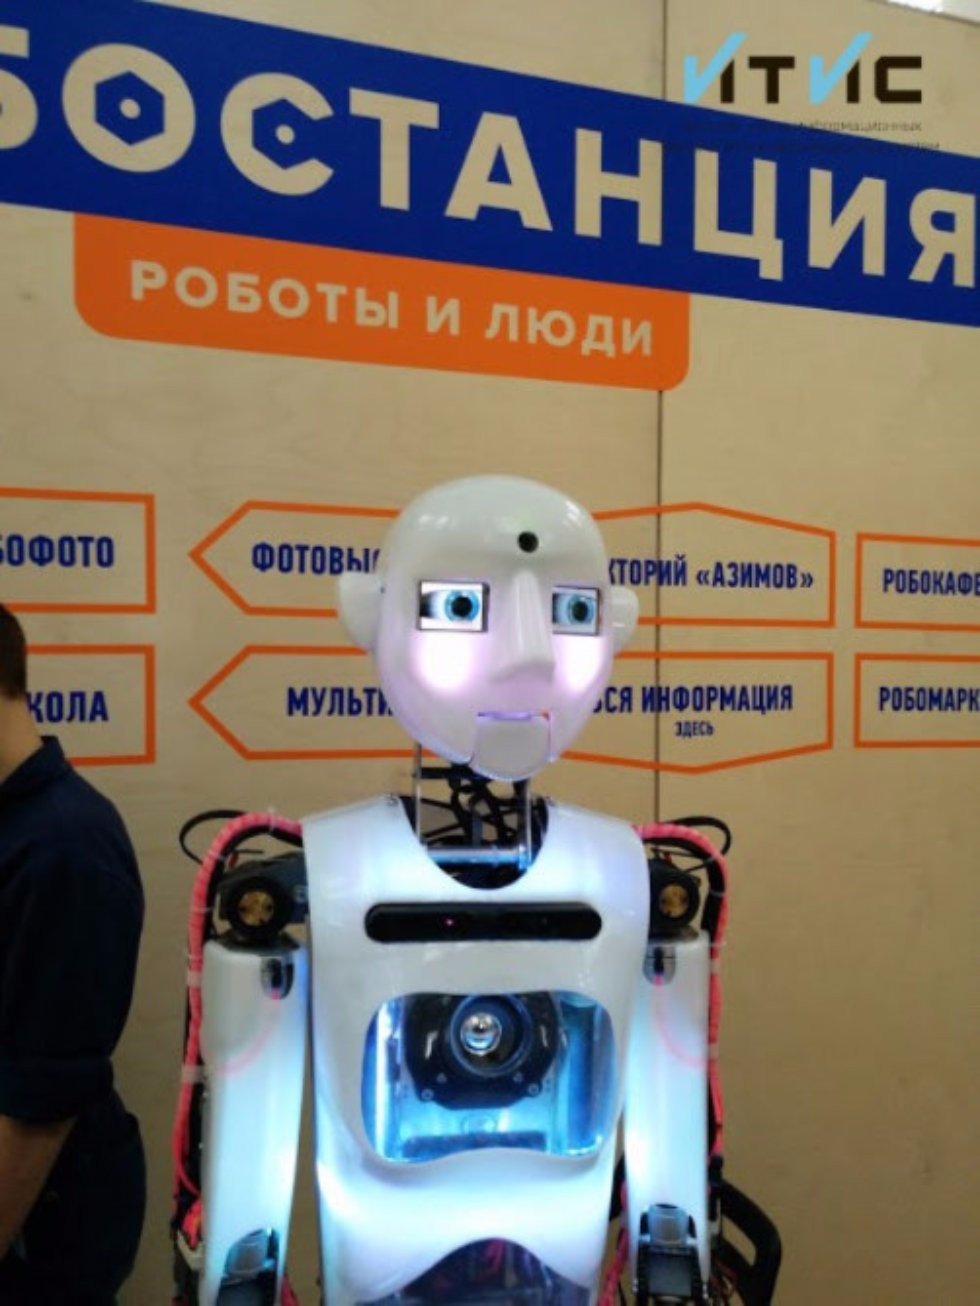 ITIS at the exhibition of robotics